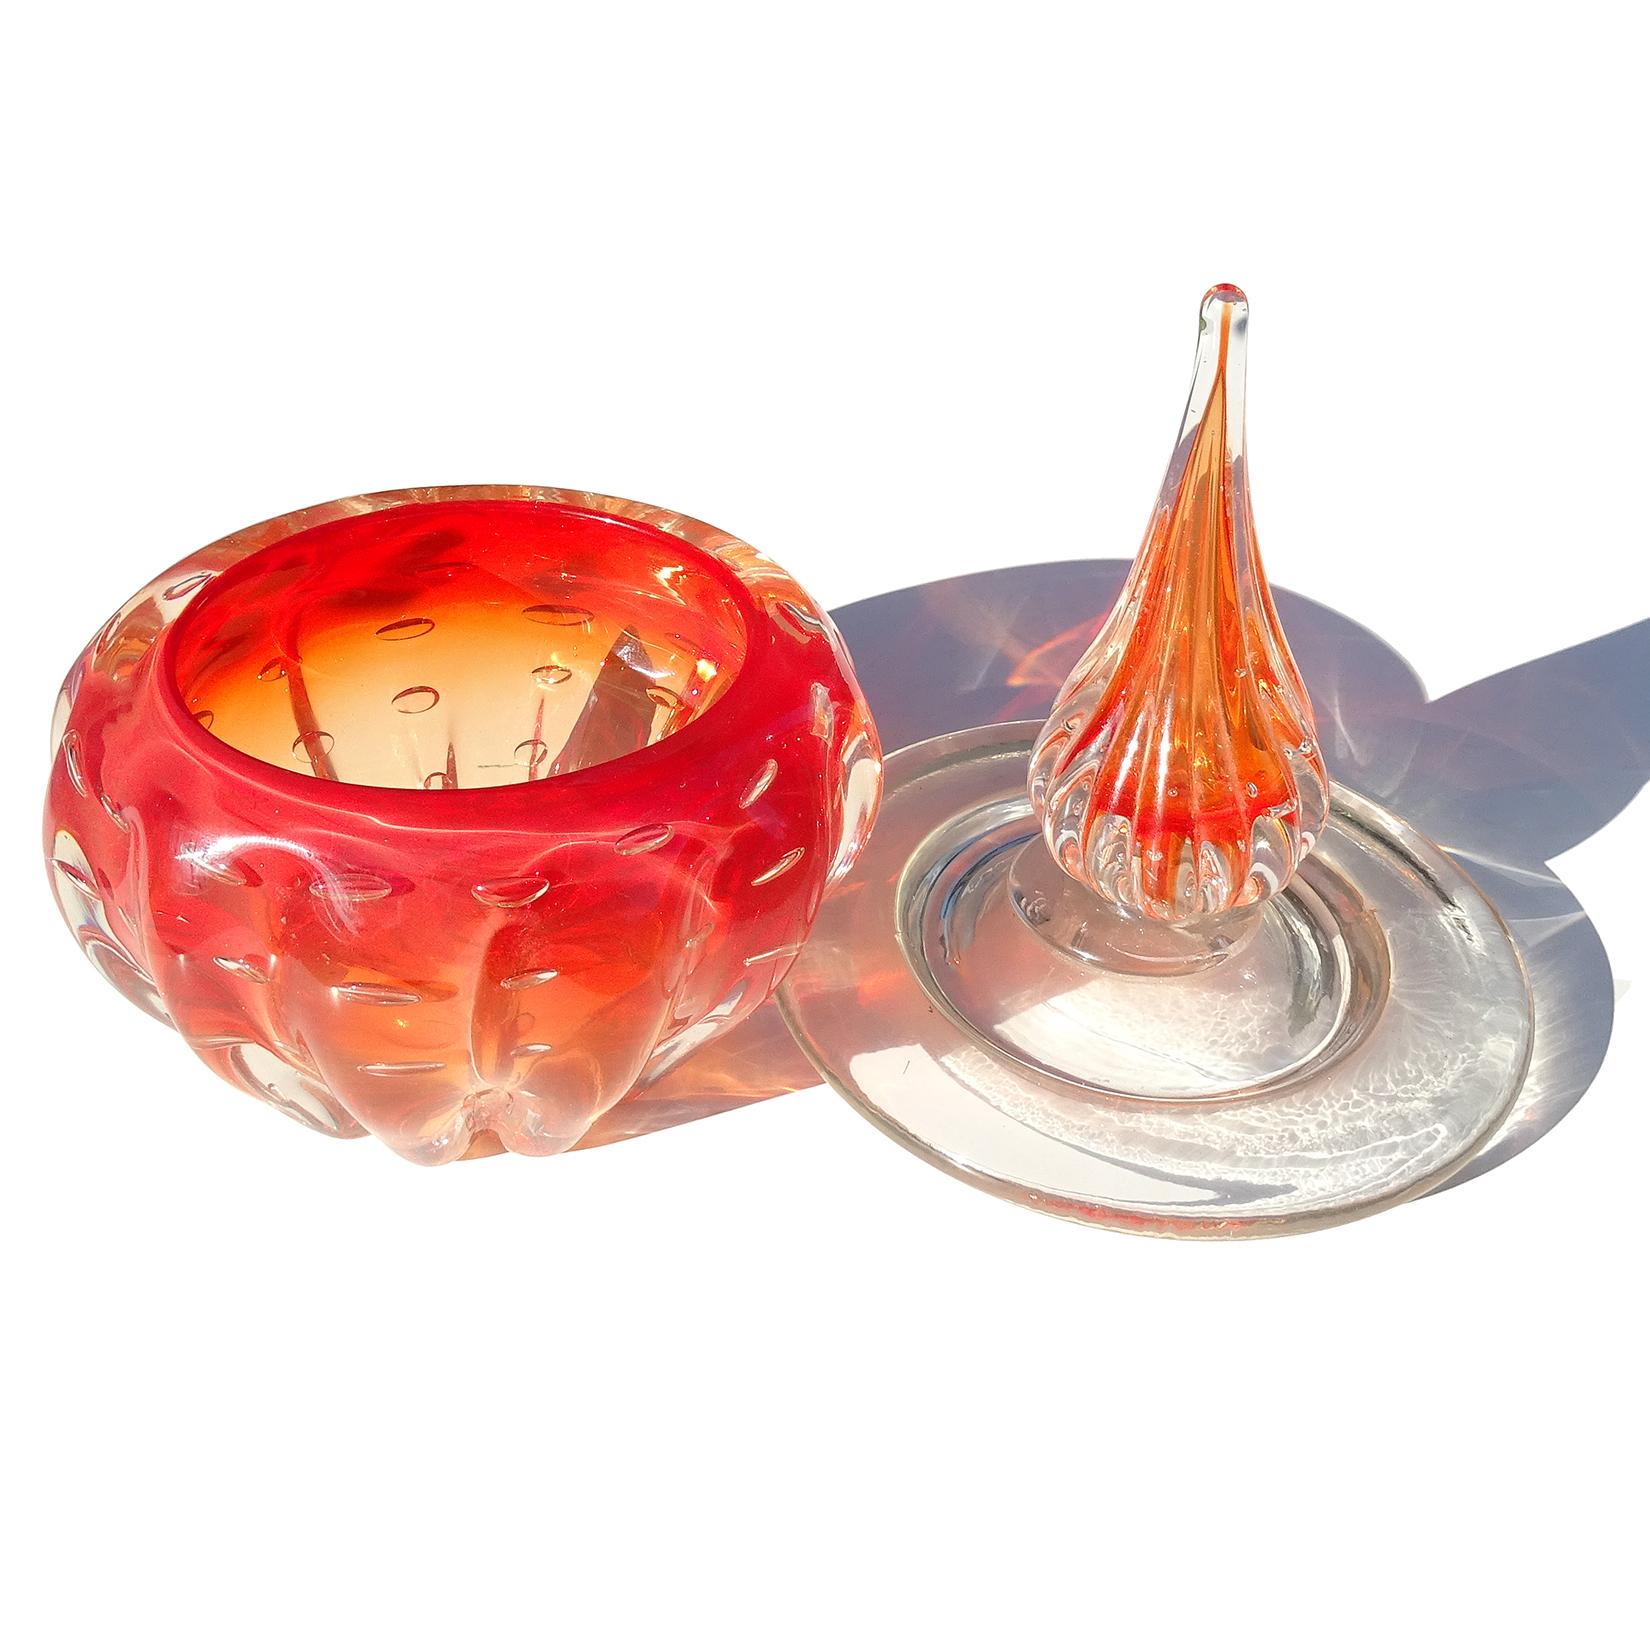 Beautiful vintage Murano hand blown Sommerso red orange and bubbles Italian art glass lidded vanity dresser jar. The piece has a ribbed body, with large clear lid and spike topper. Made in the 